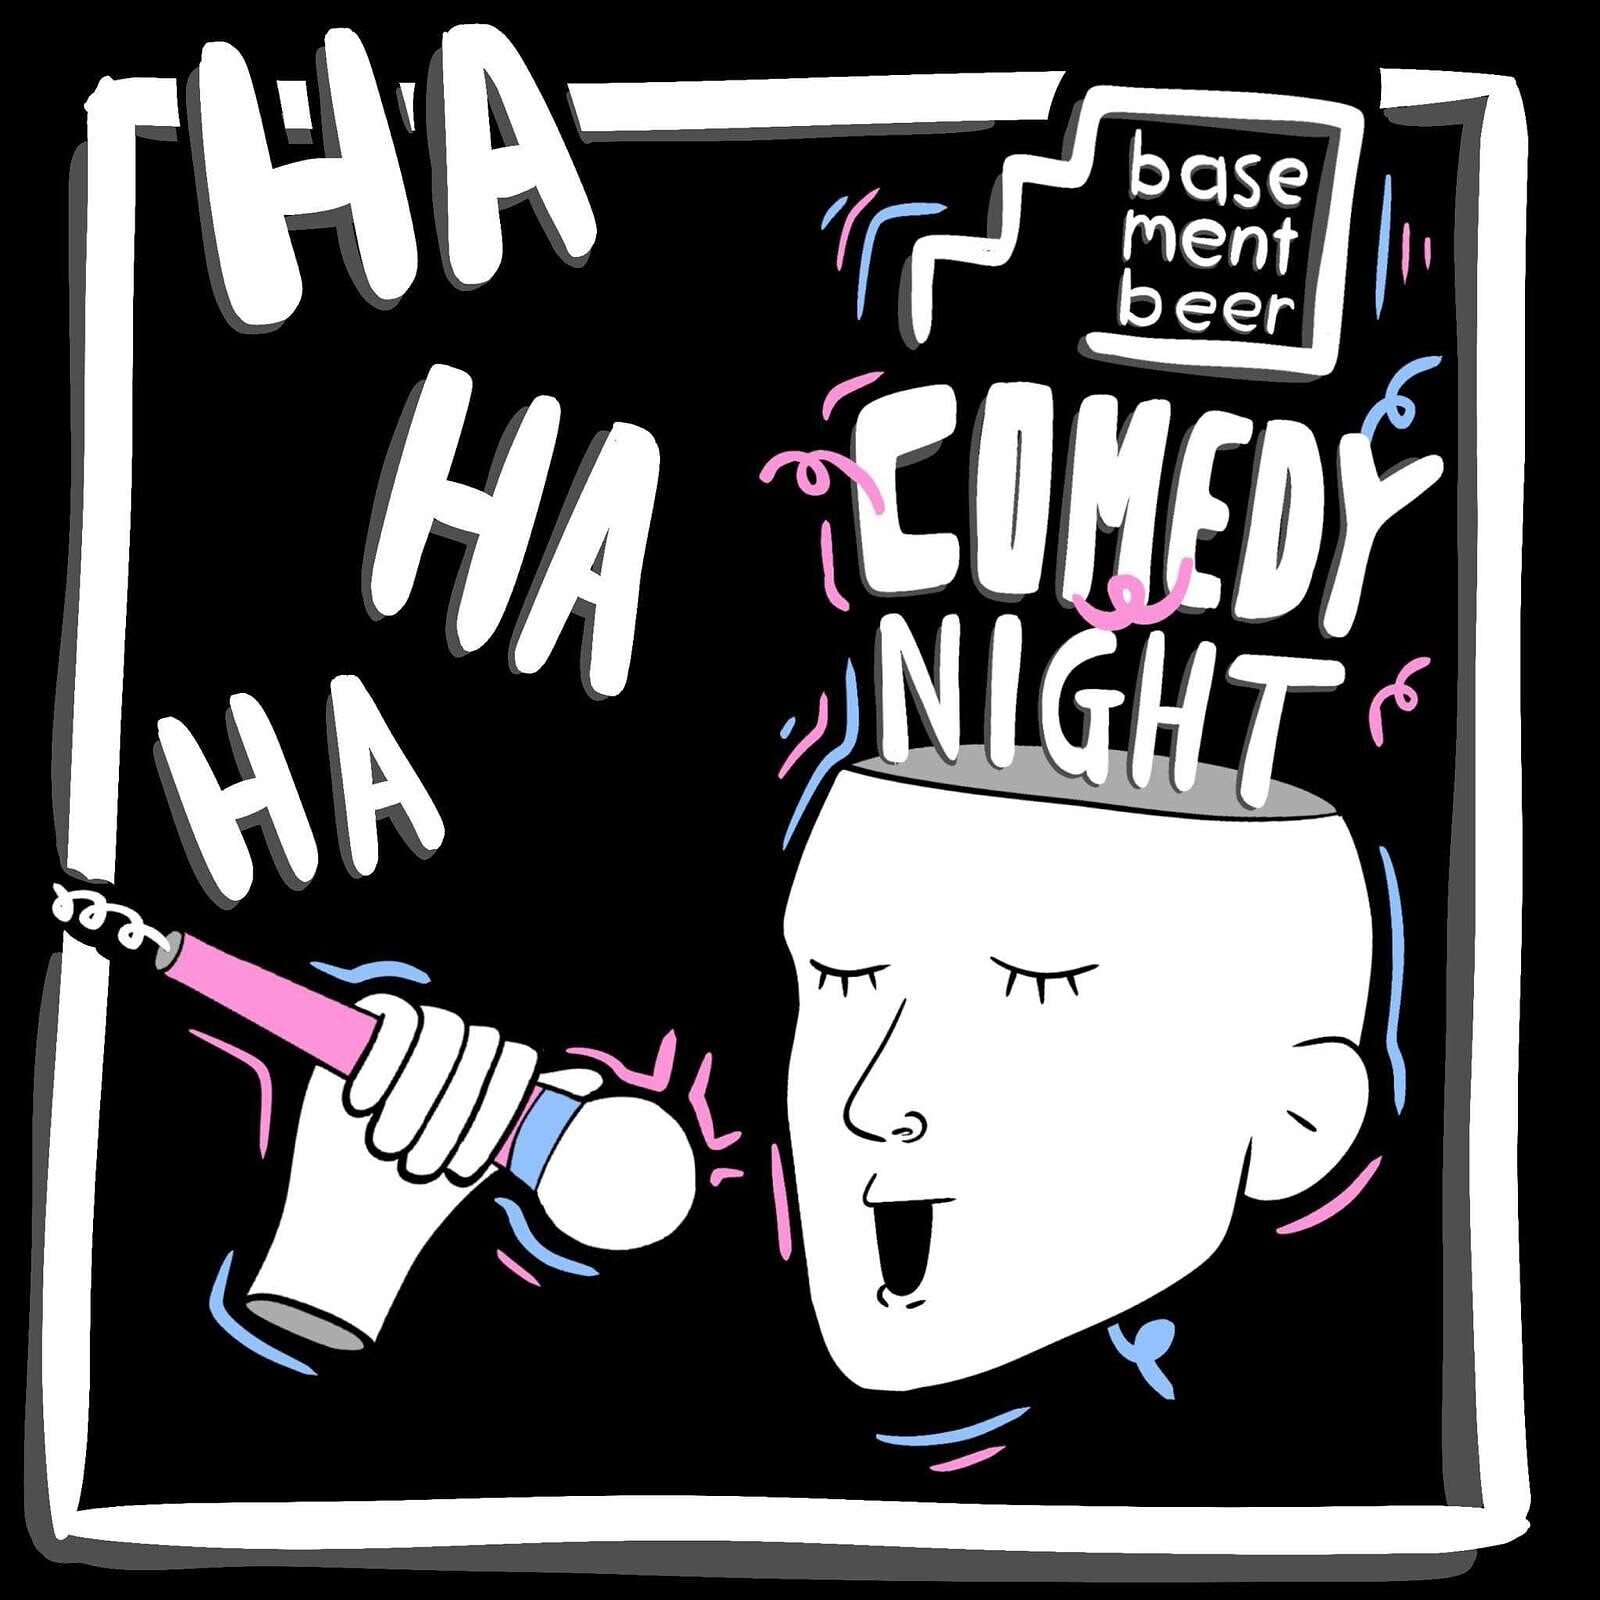 Craft Comedy at Basement Beer